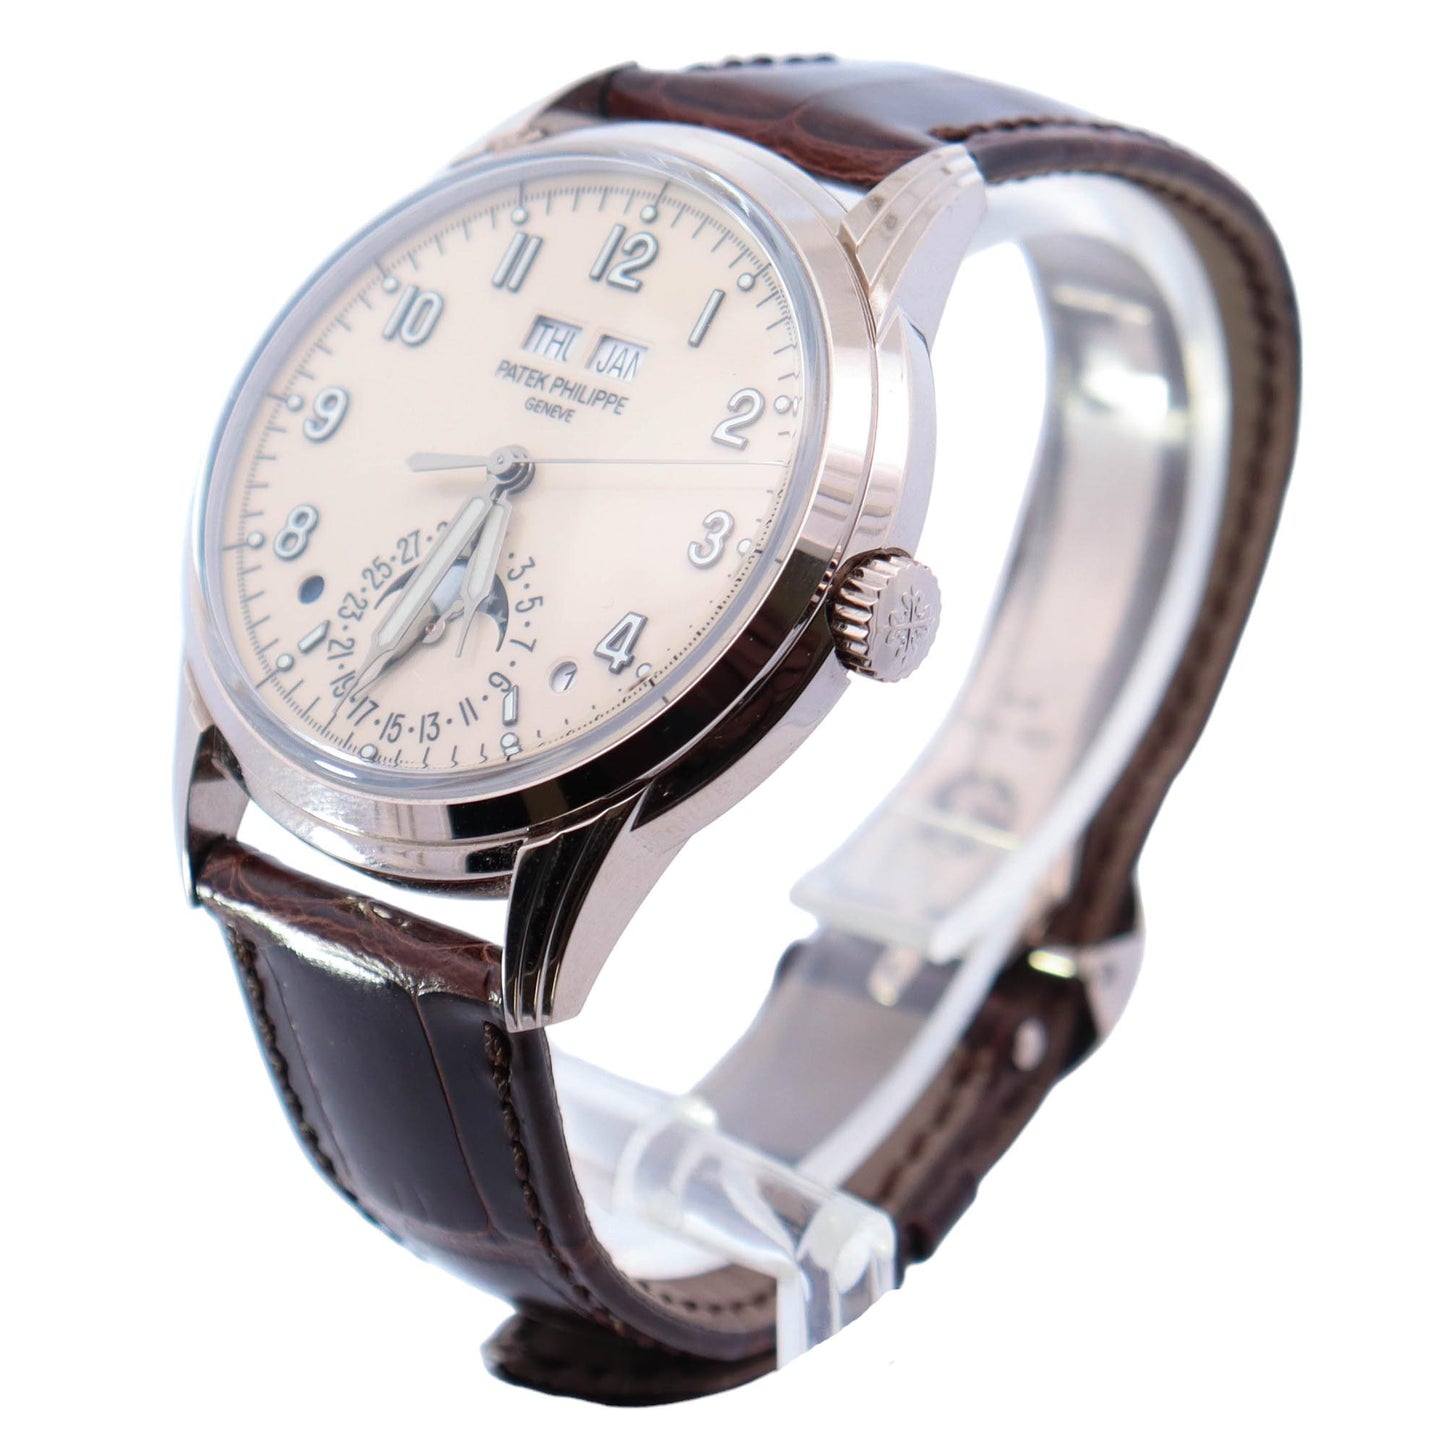 Patek Philippe Grand Complications Perpetual Calendar White Gold 40mm Cream Arabic Dial Watch Reference# 5320G-001